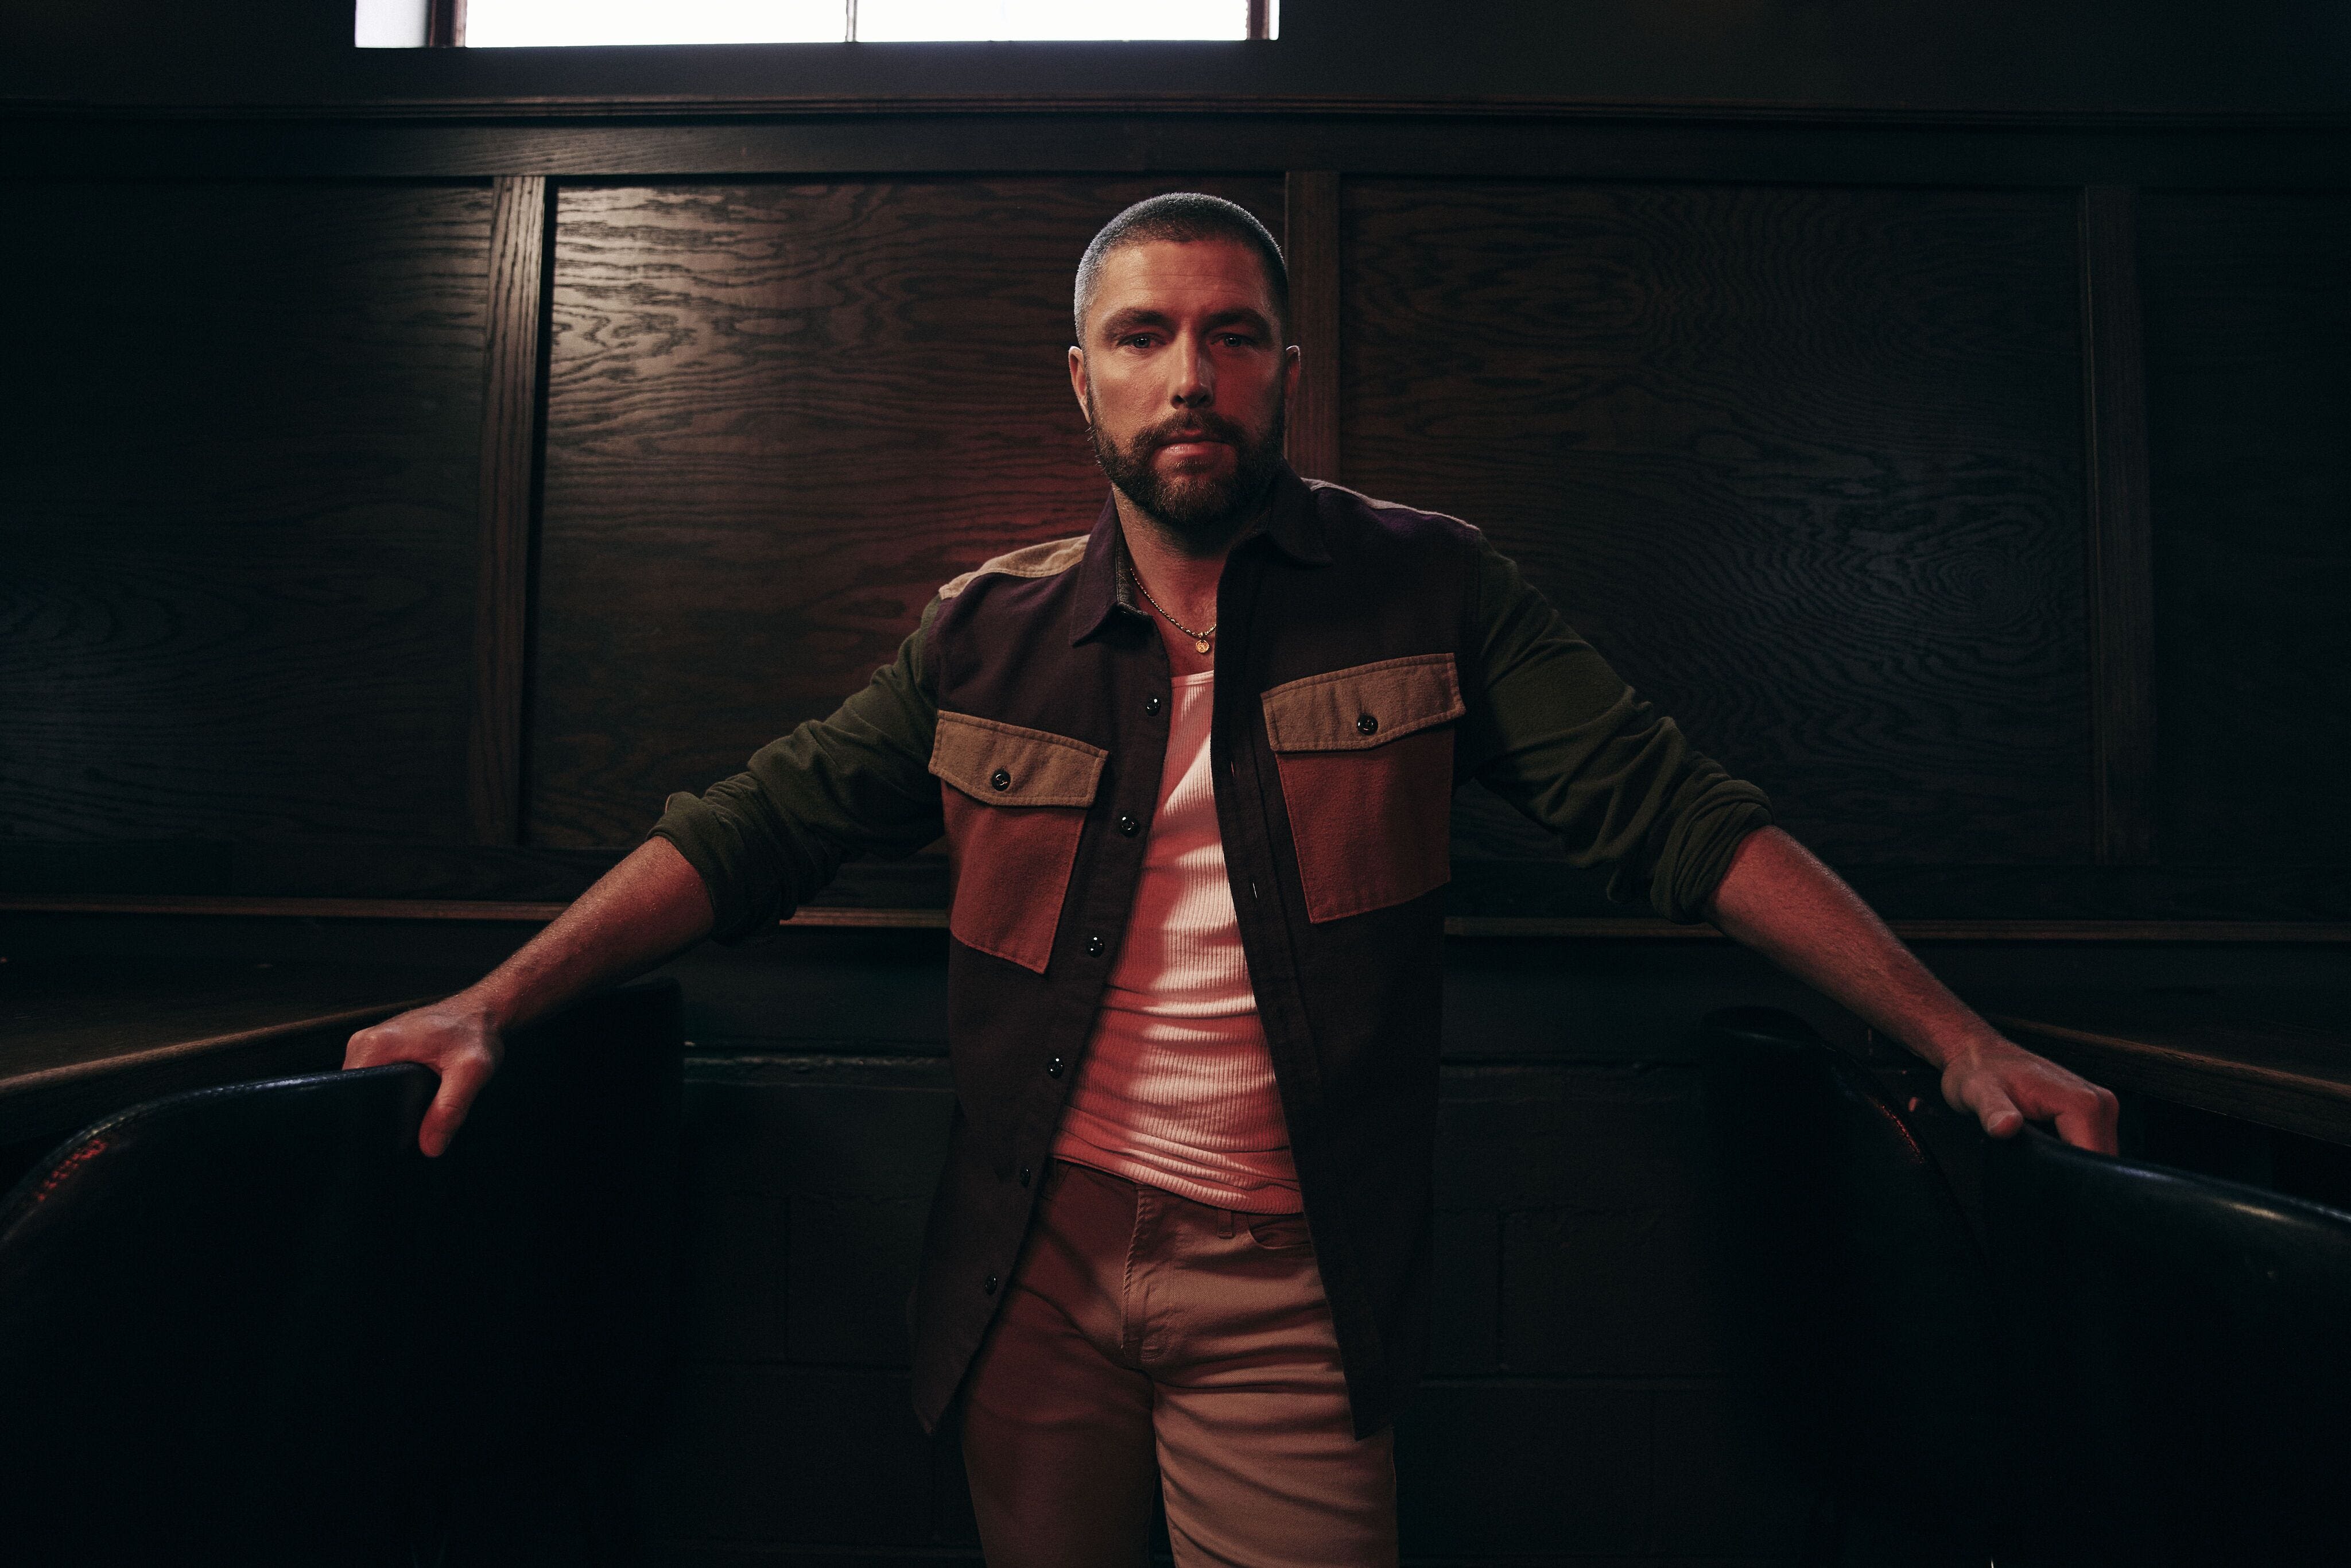 Chris Lane will perform in West Lafayette. Here's where you can see him